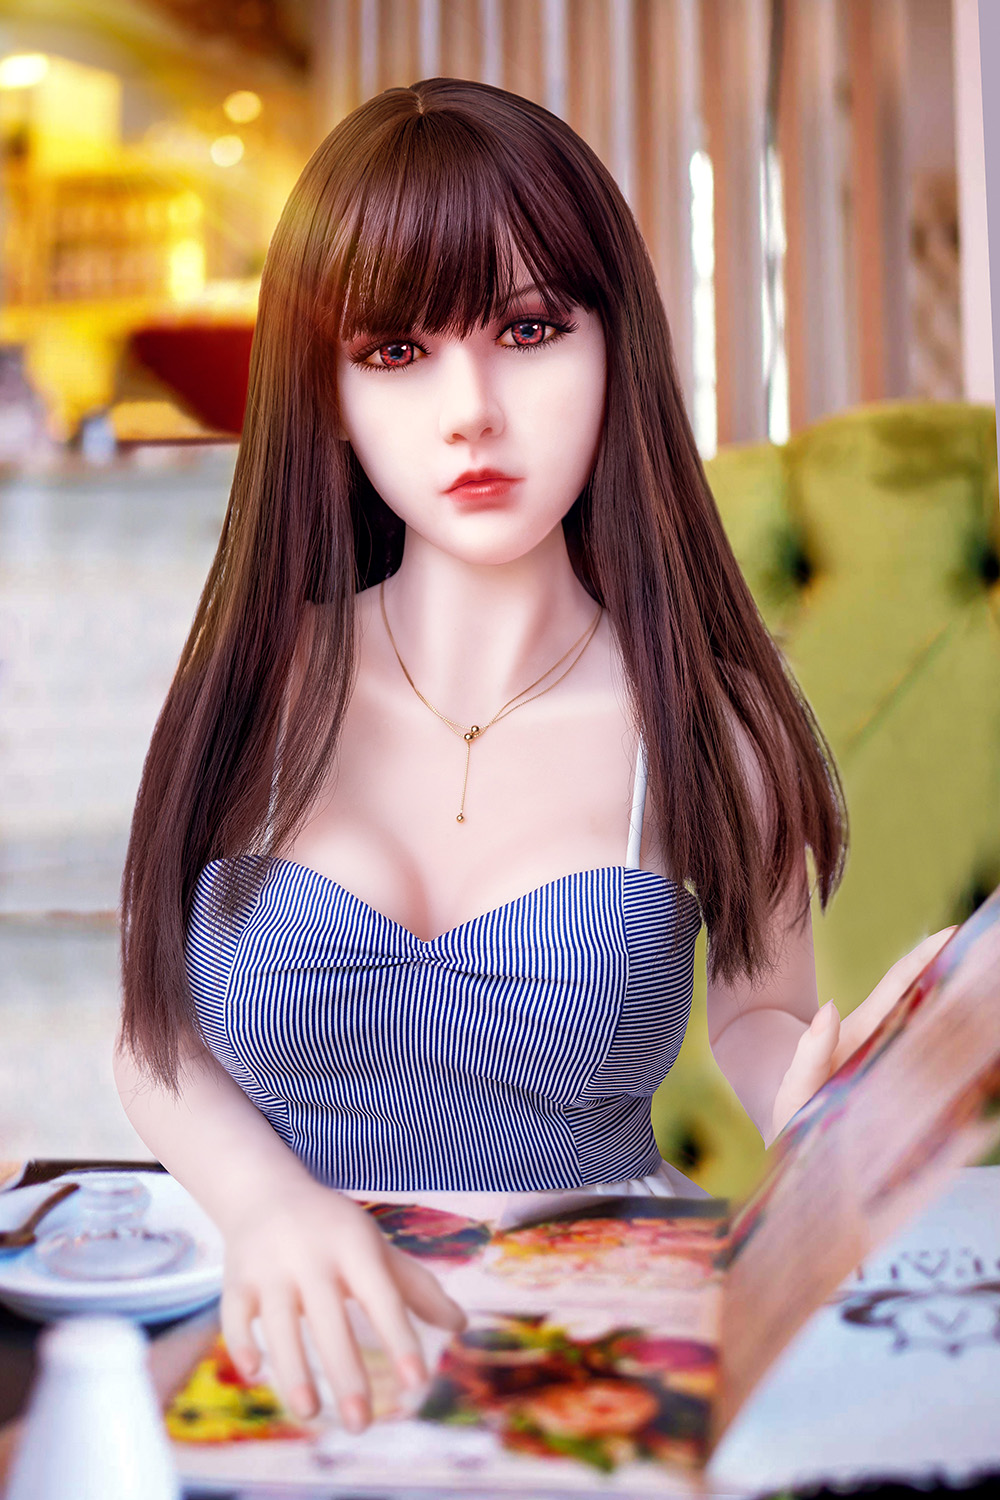 removable sex doll